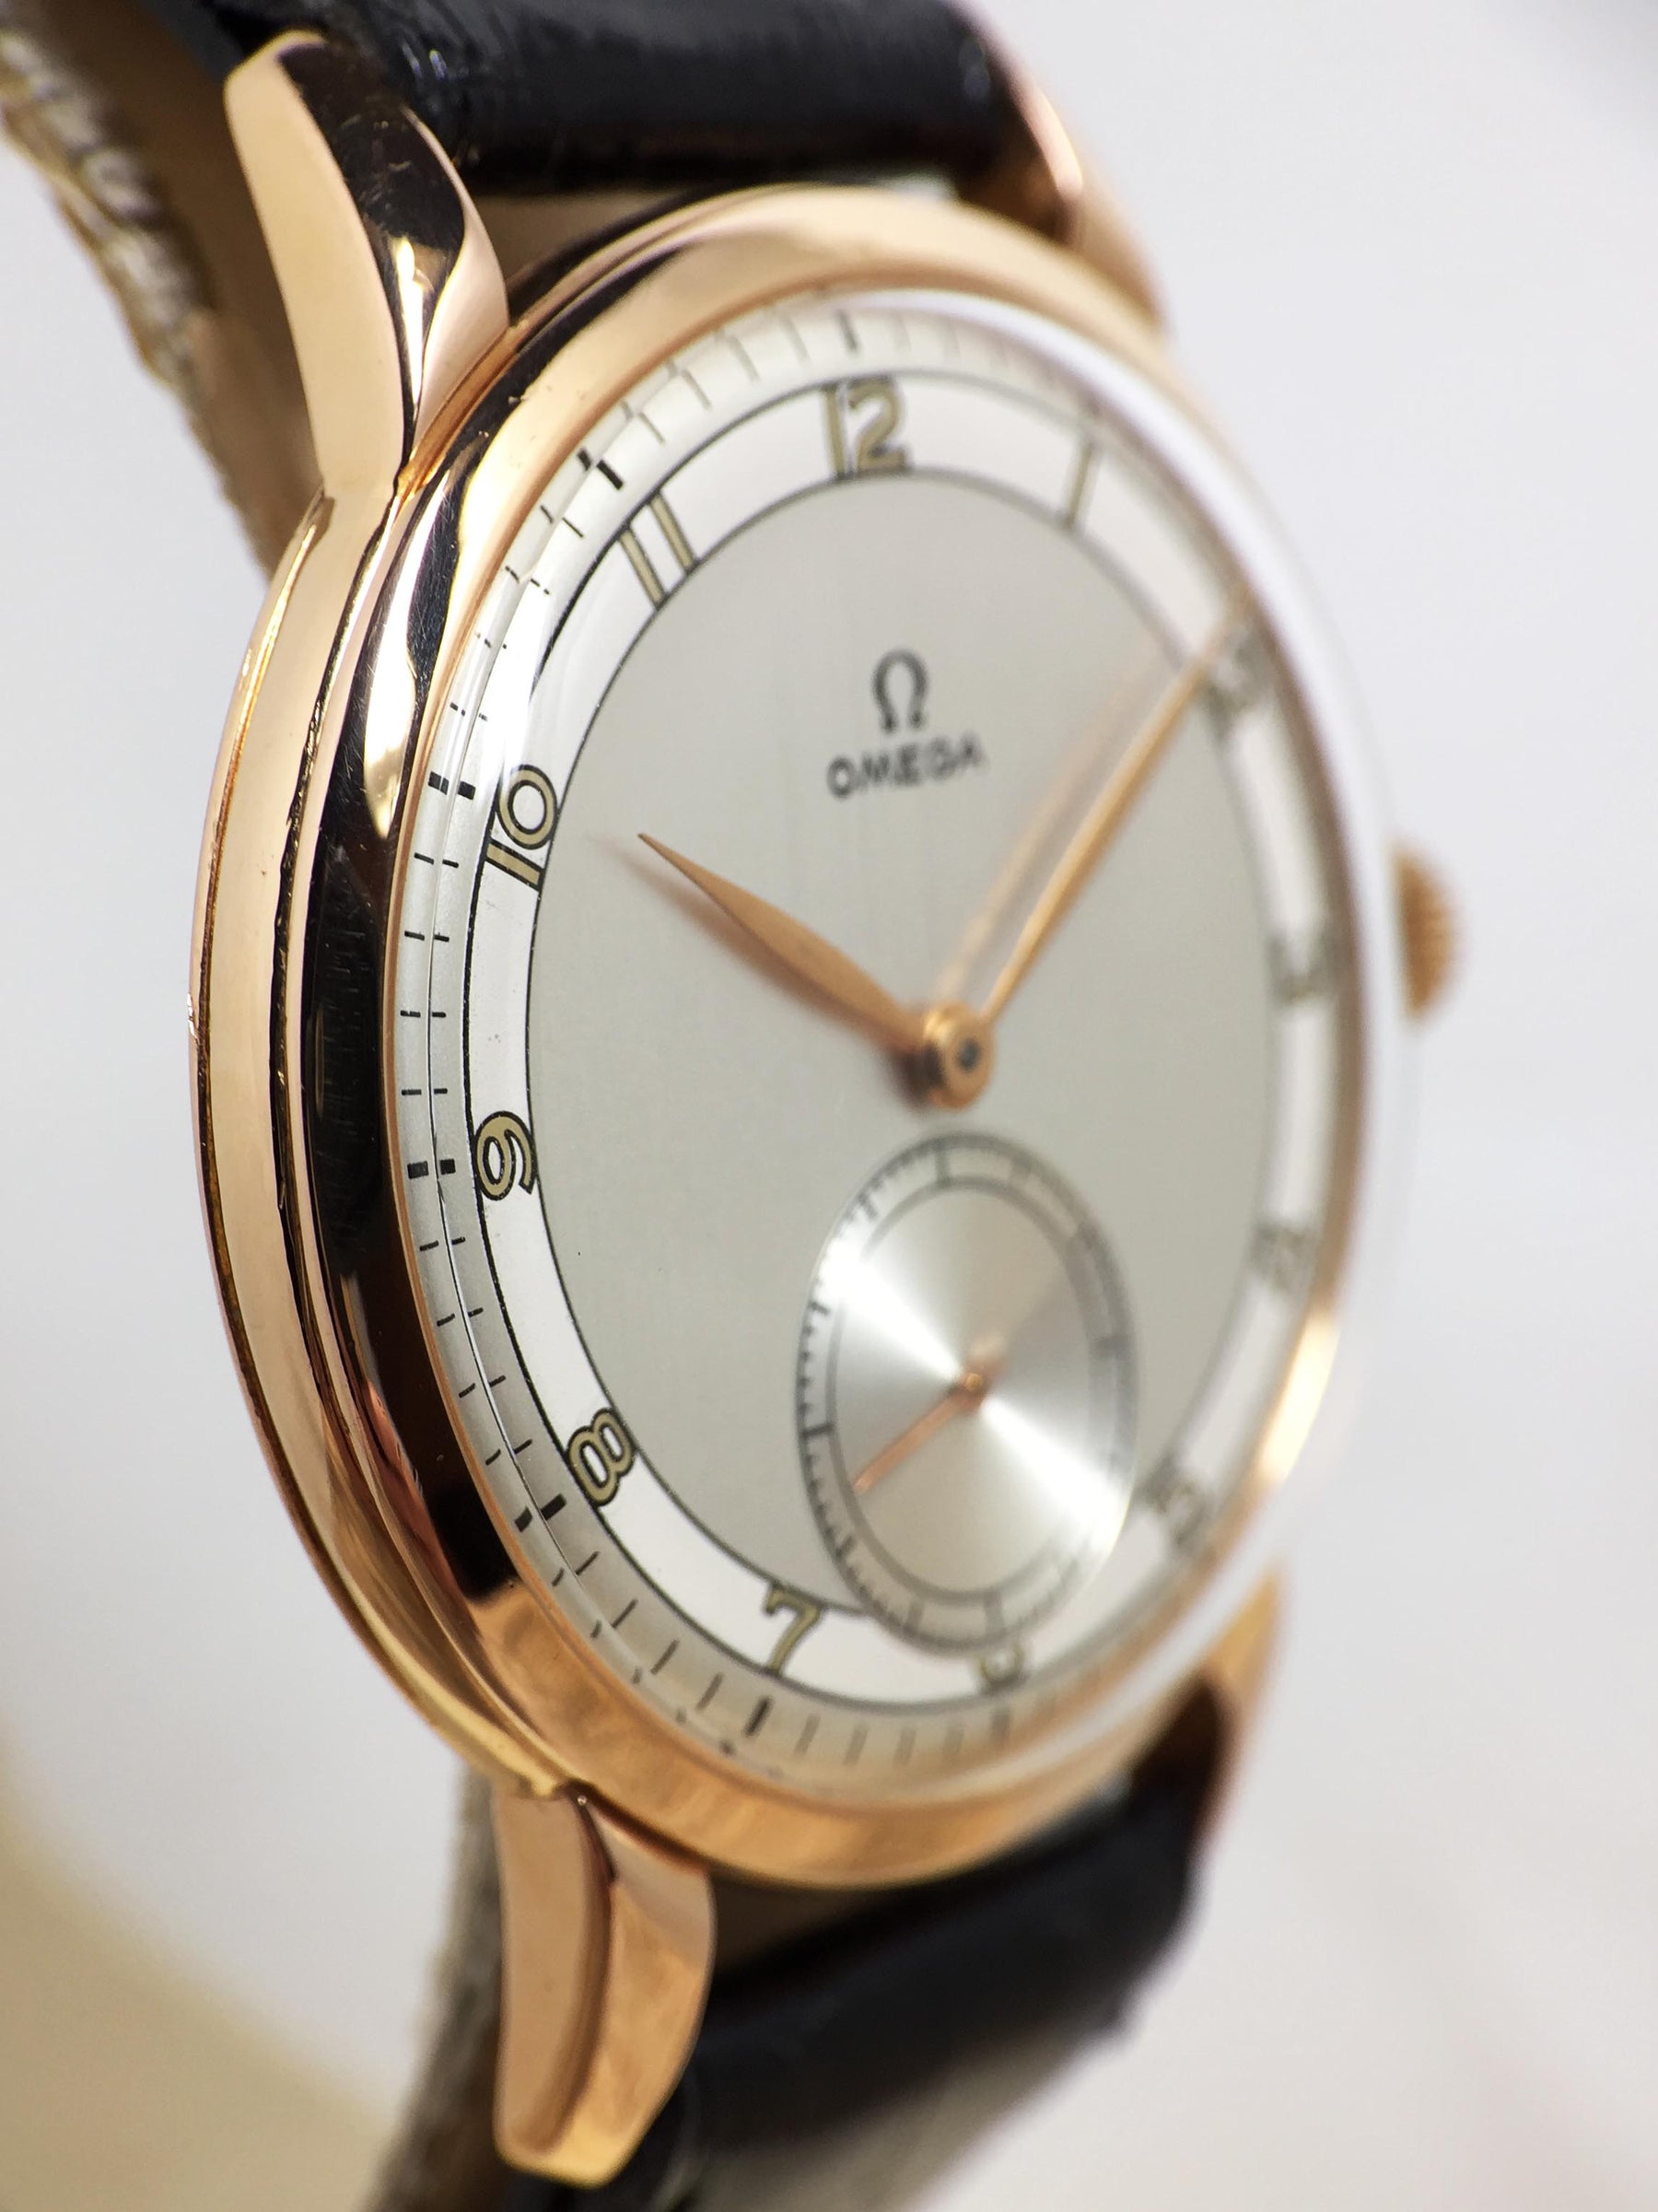 1952 Omega Dress Watch Pink Gold Two Tone Dial Ref. 2687